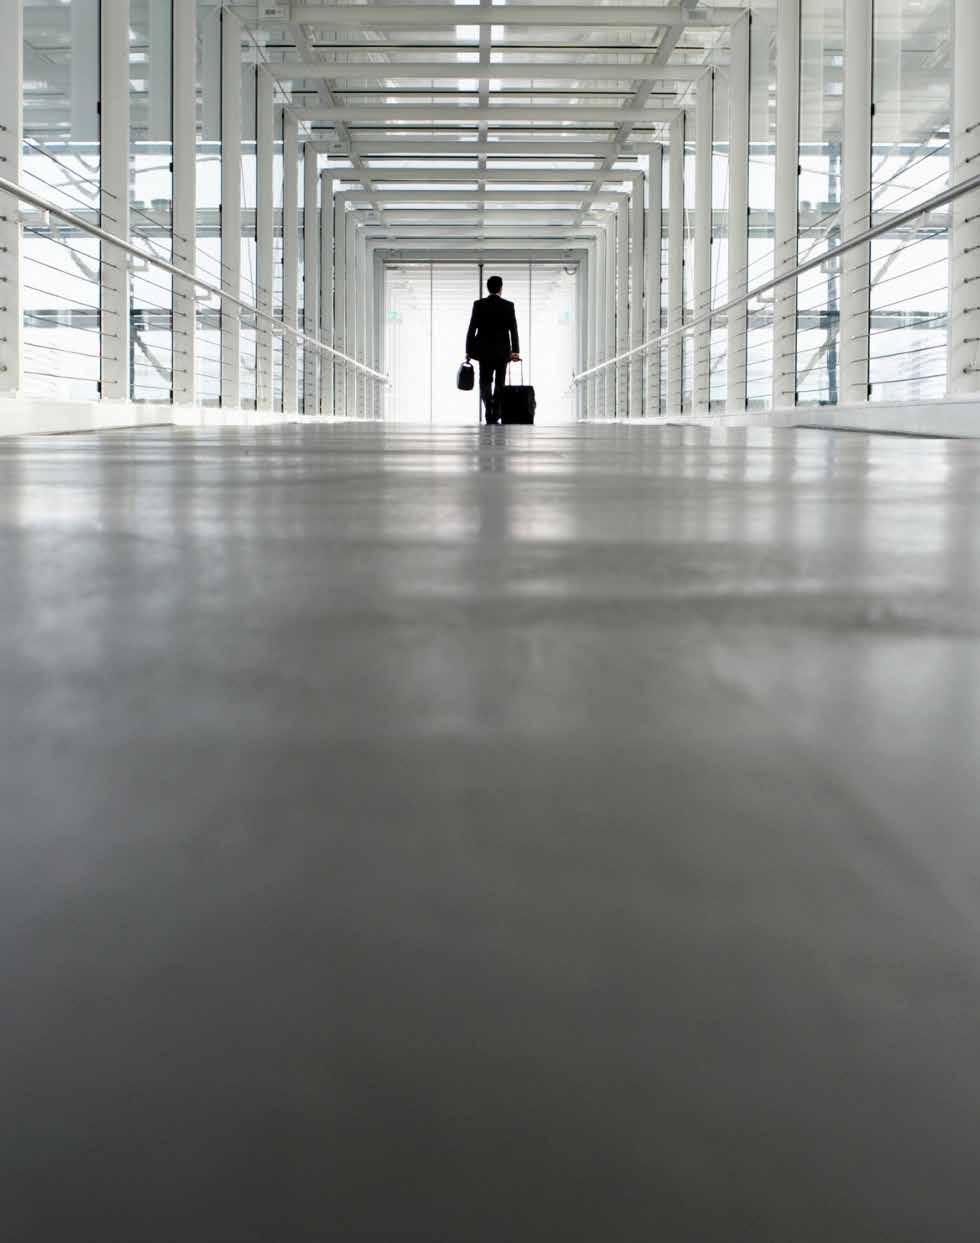 Commercial Flooring Systems Benjamin Moore Corotech High-Performance Flooring Systems are designed for application by professionals in commercial and industrial environments, as well as in select